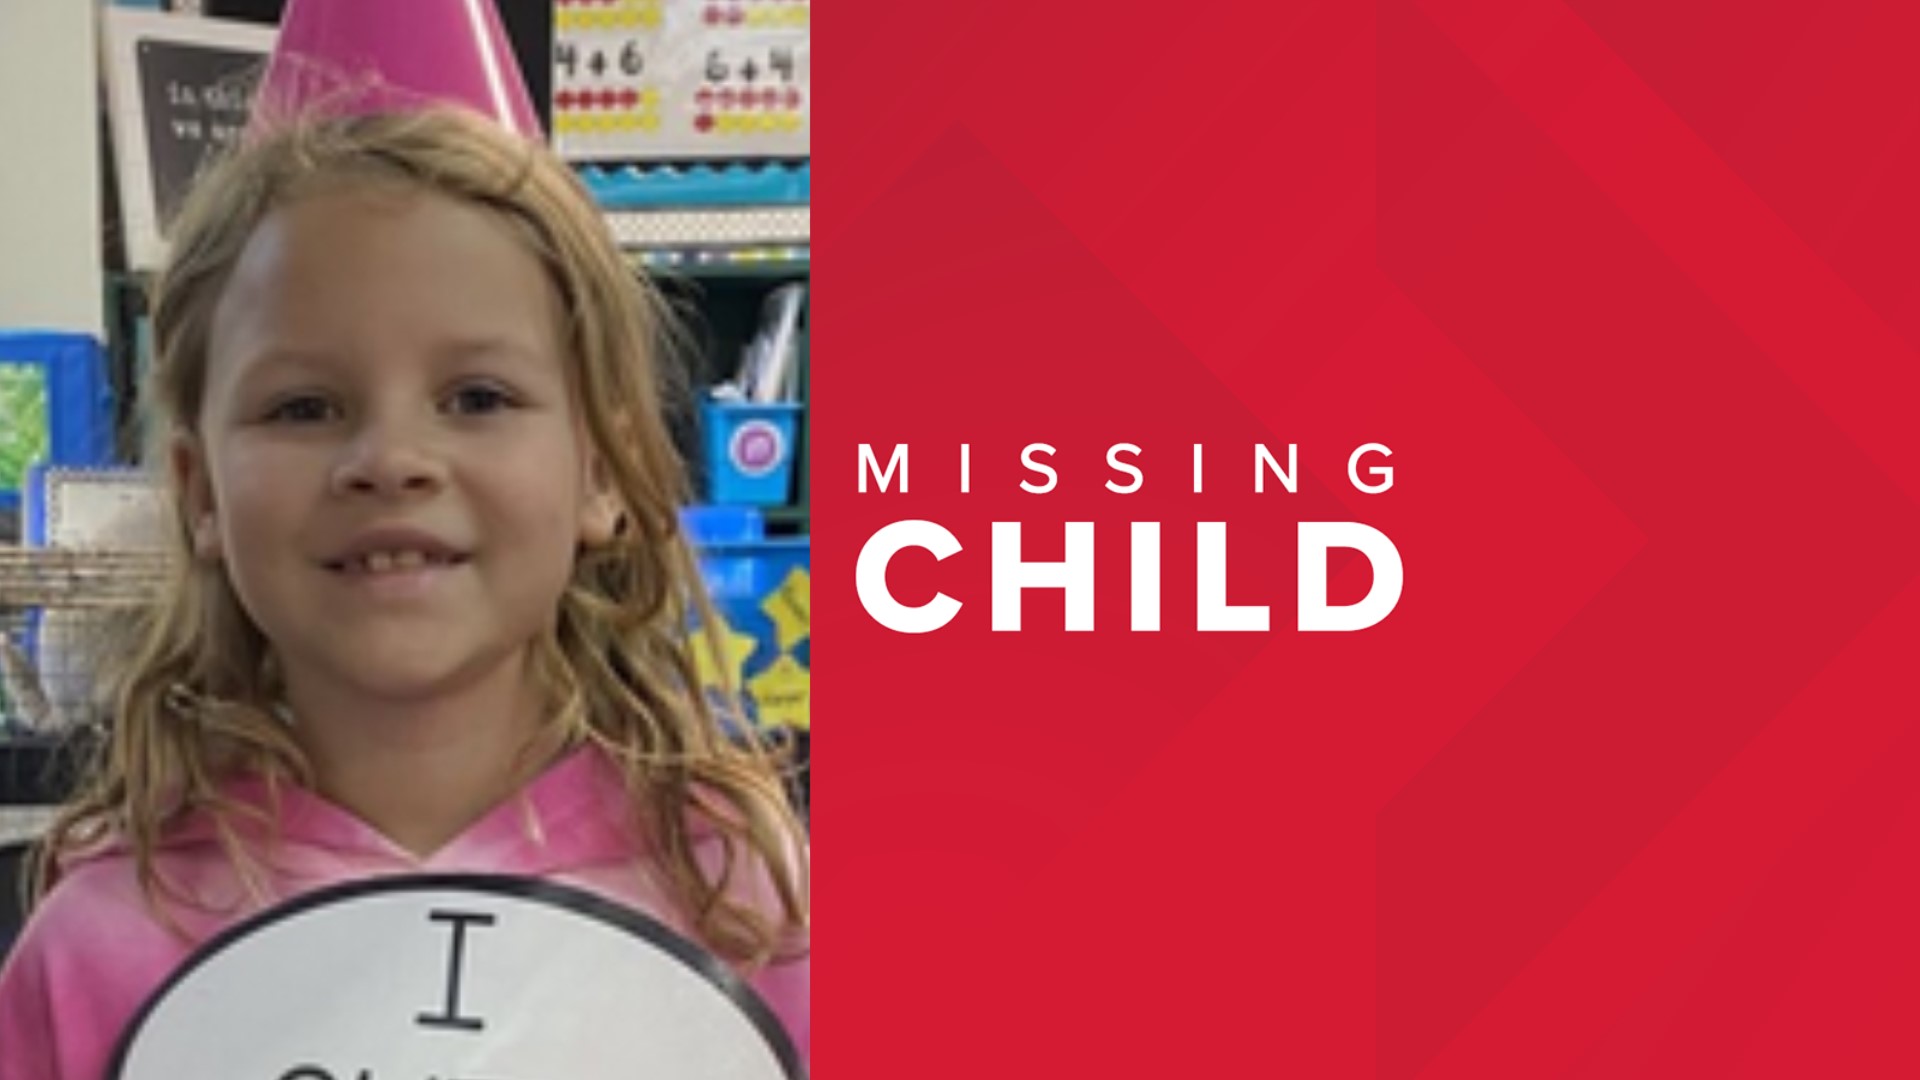 Seven-year-old Athena was last seen around County Road 3573 in Paradise. Anyone with information should call the Wise County Sheriff's Office (WCSO) at 940-627-5971.